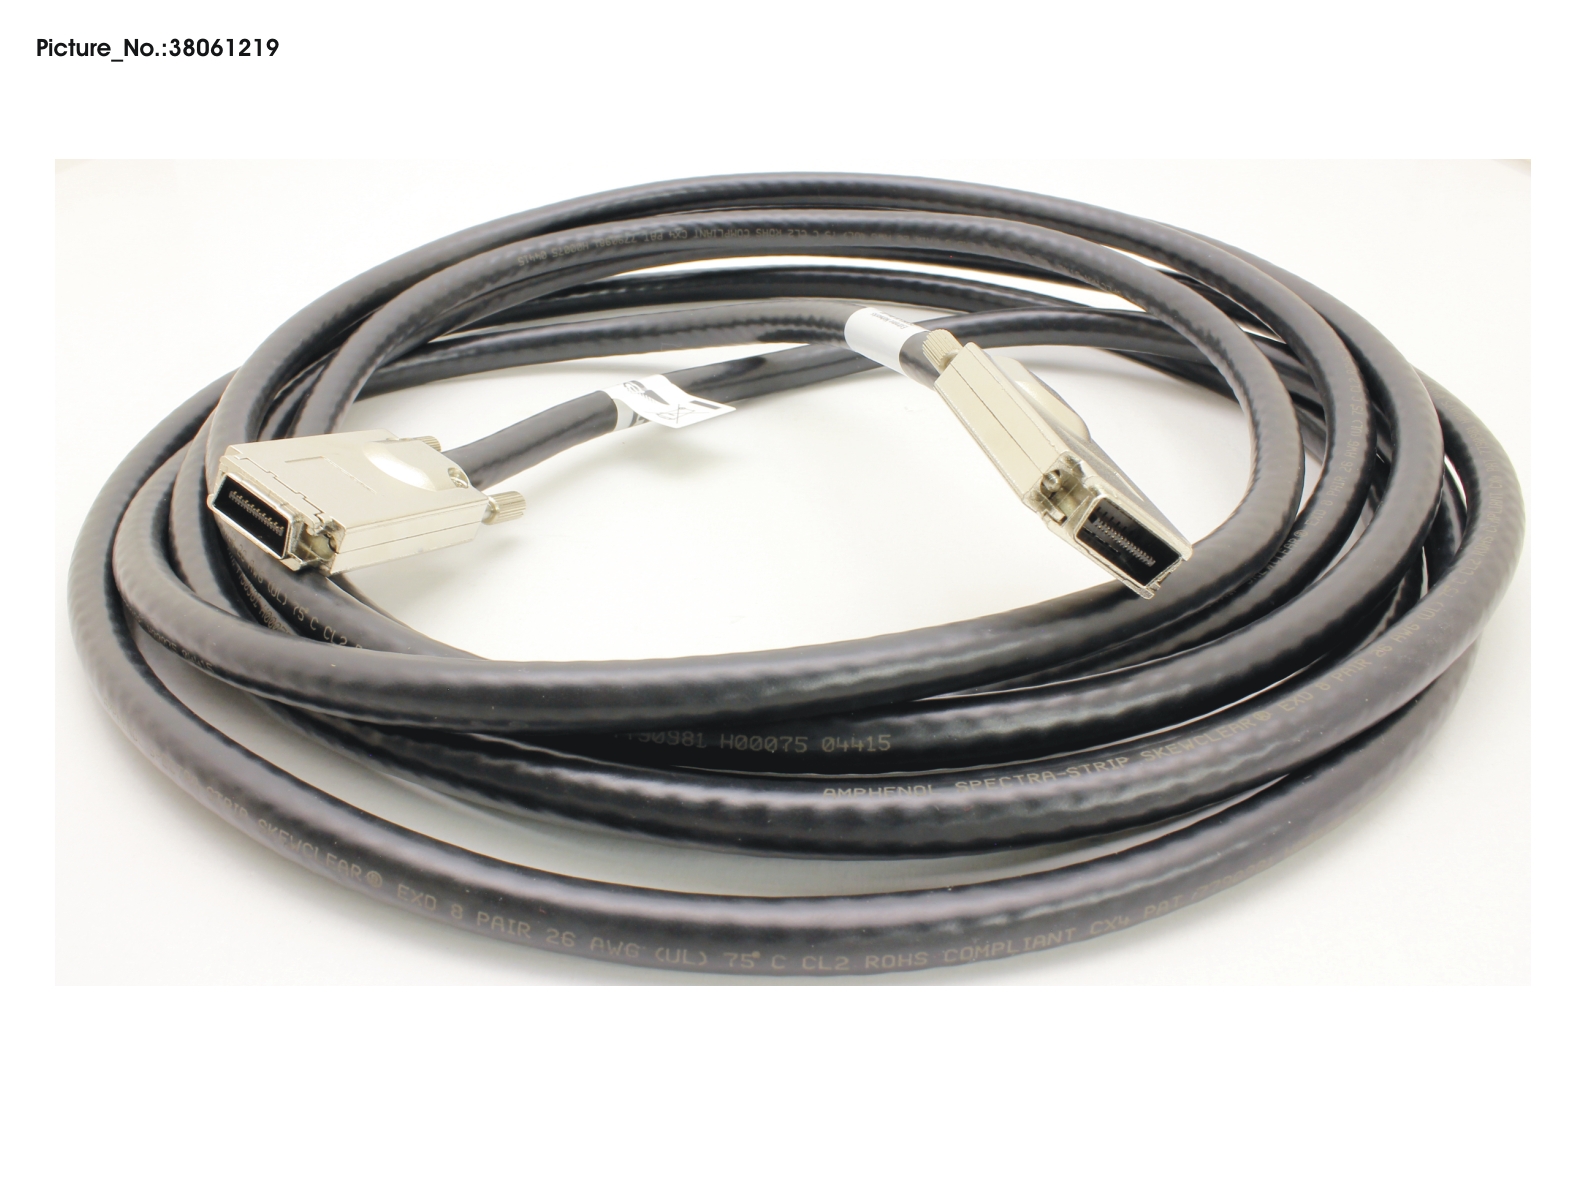 CABLE FOR SUMMITSTACK, 5.0M